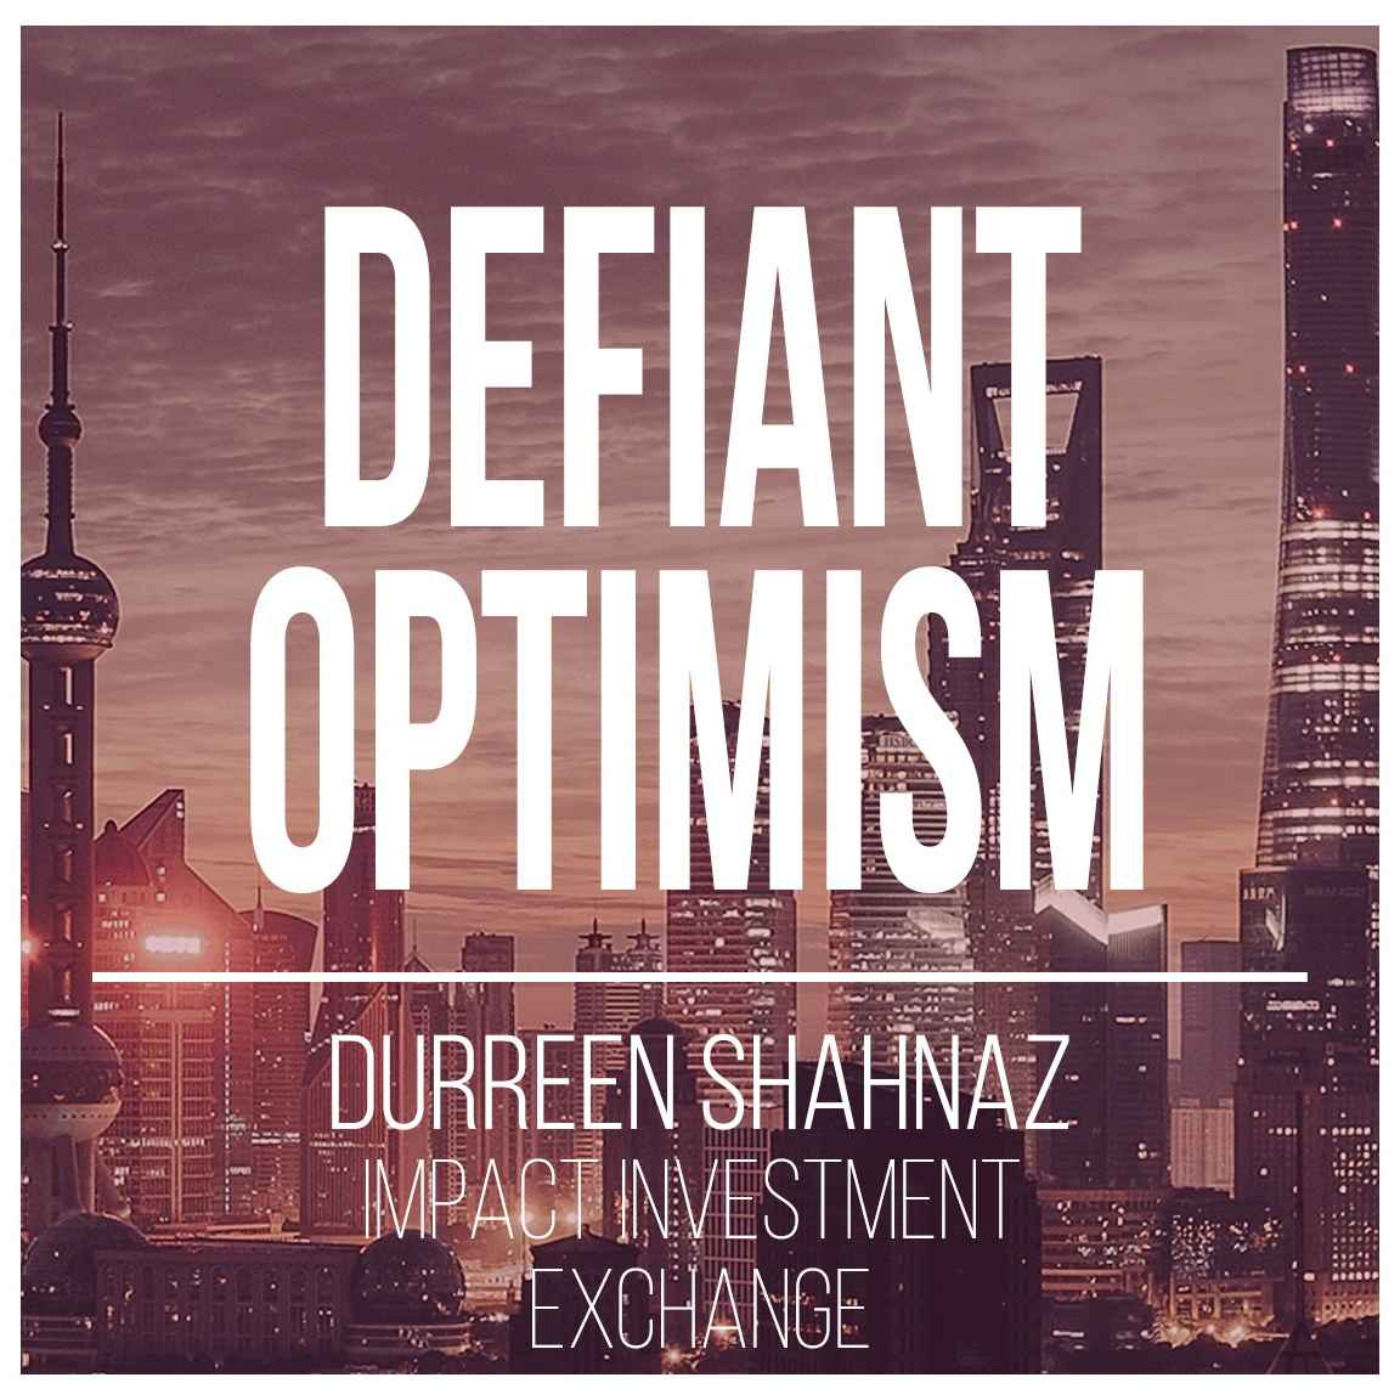 The Power of Defiant Optimism to Deliver Global Change